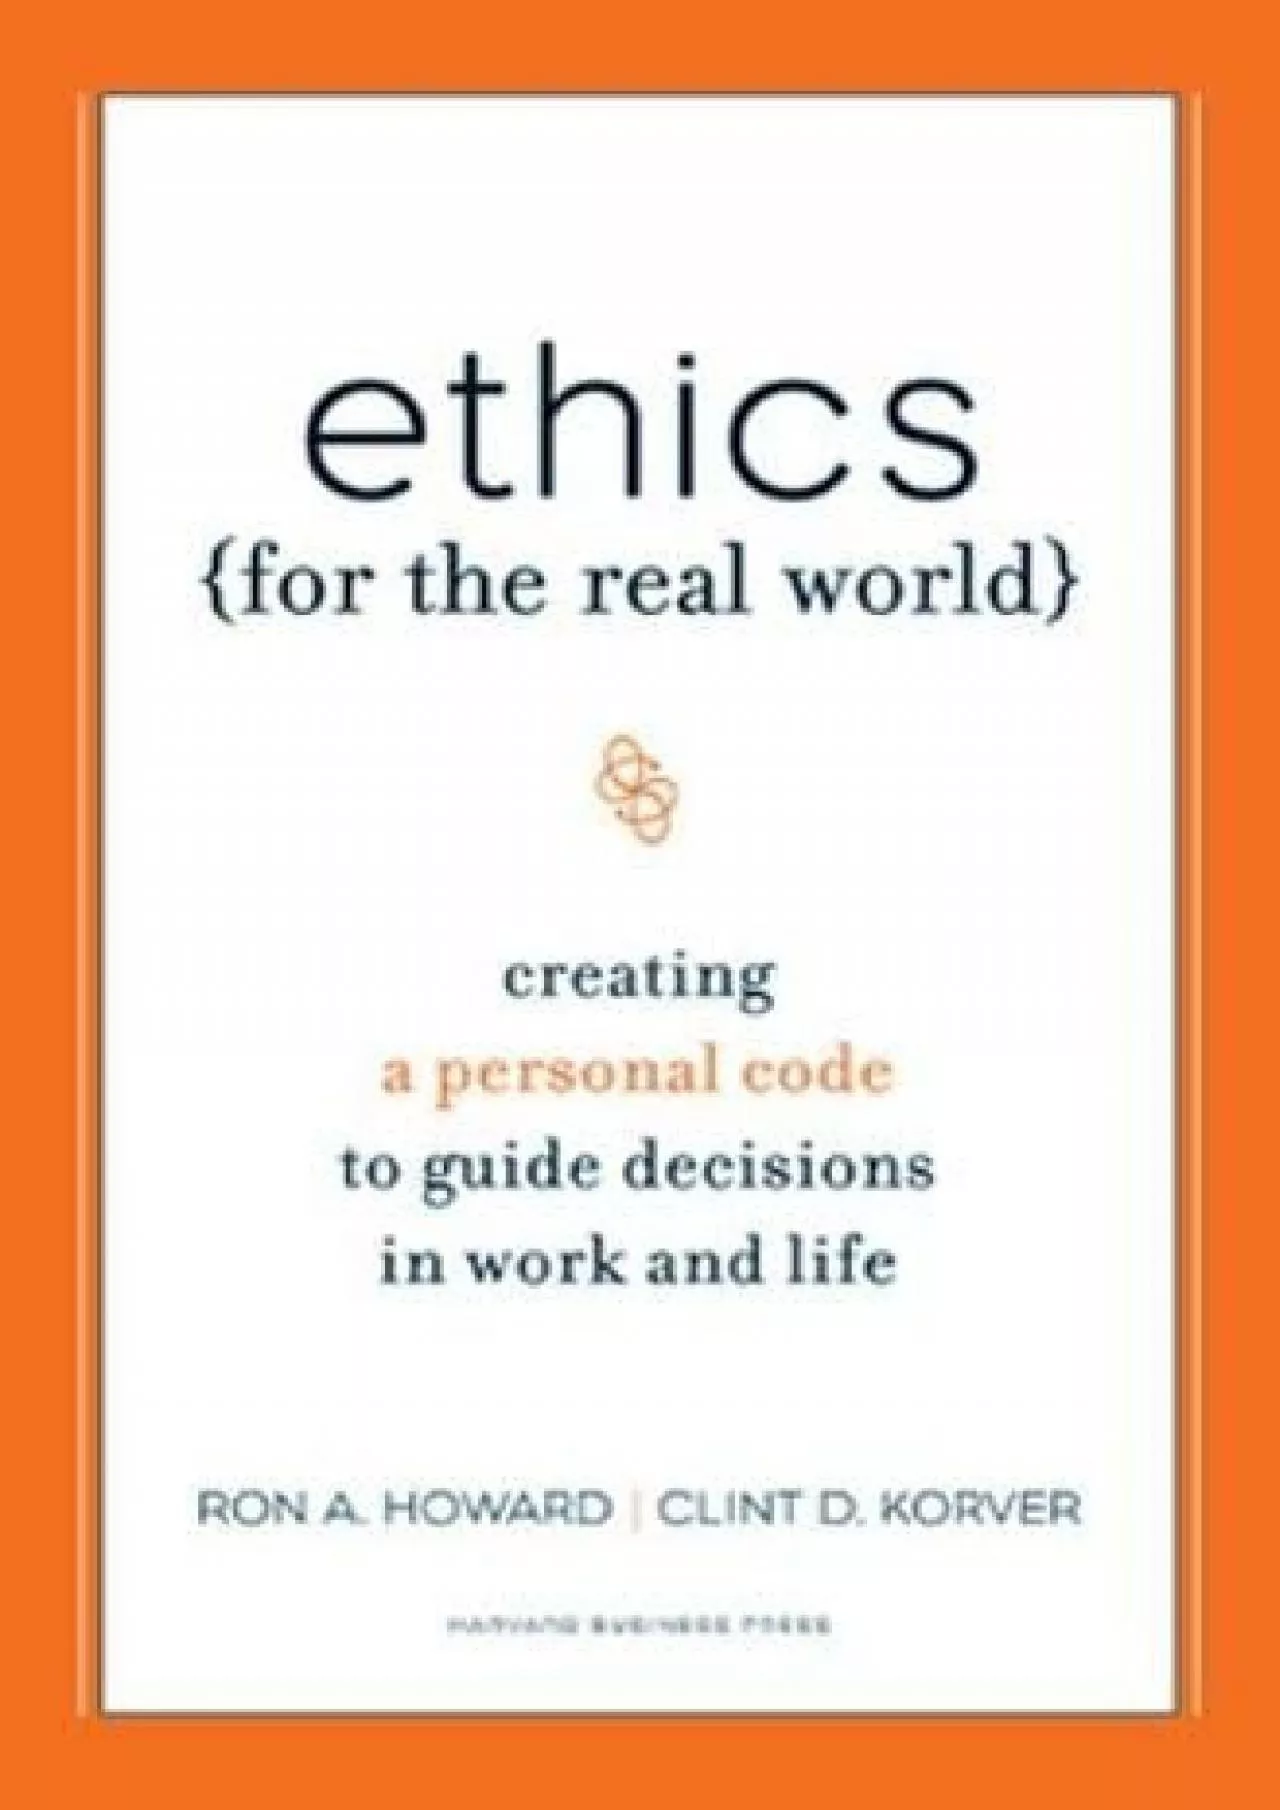 (BOOK)-Ethics for the Real World: Creating a Personal Code to Guide Decisions in Work